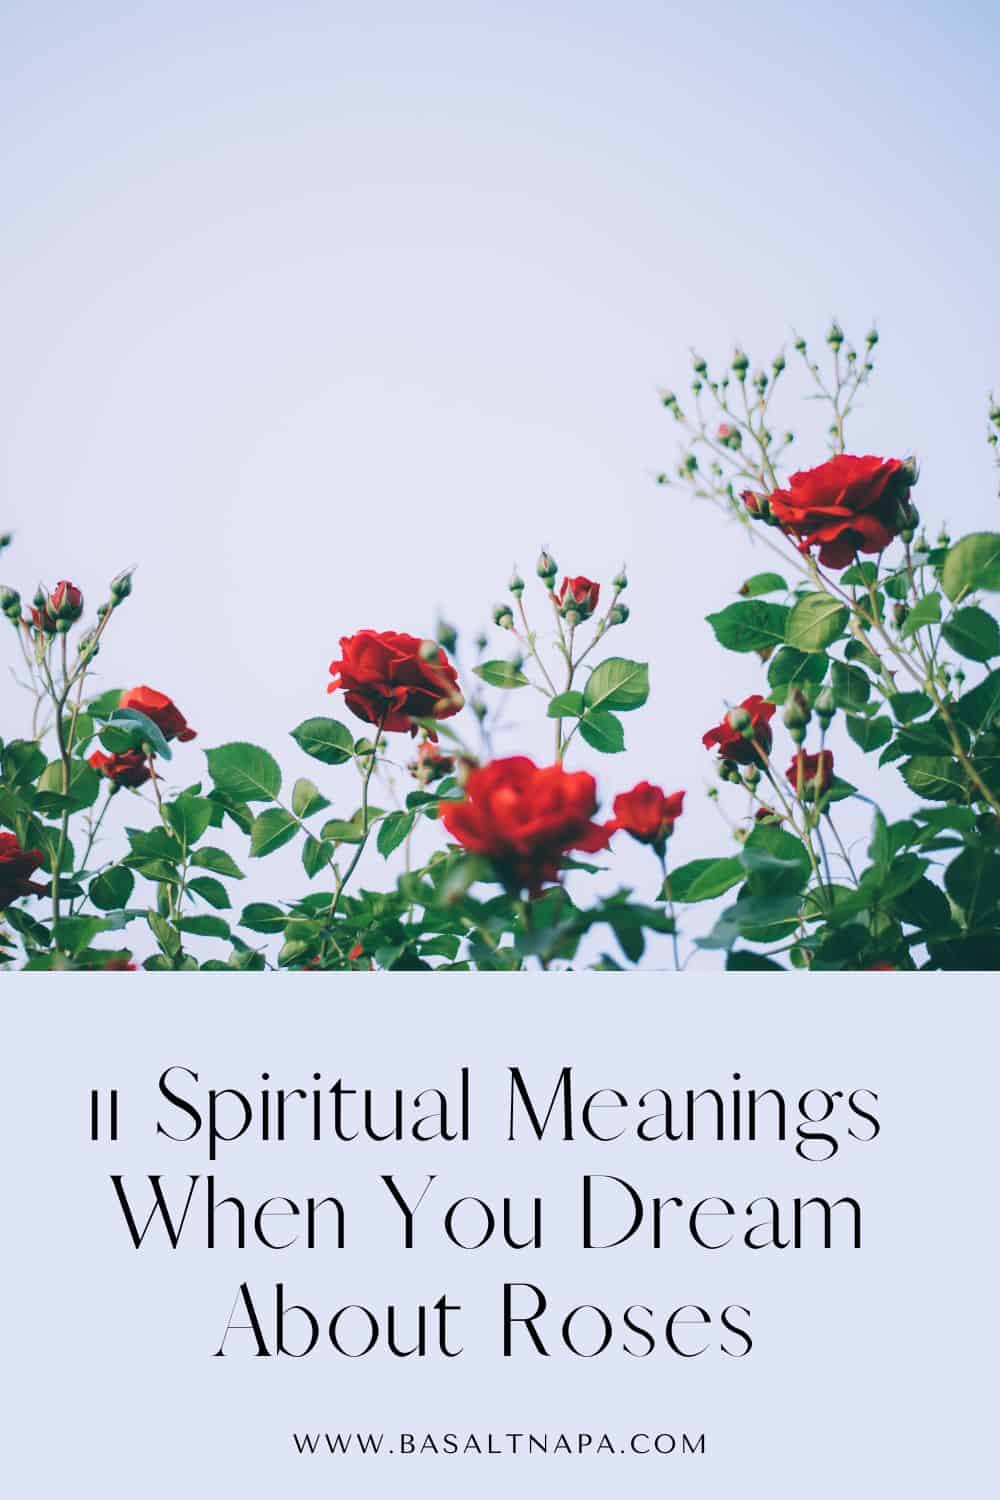 11 Spiritual Meanings When You Dream About Roses